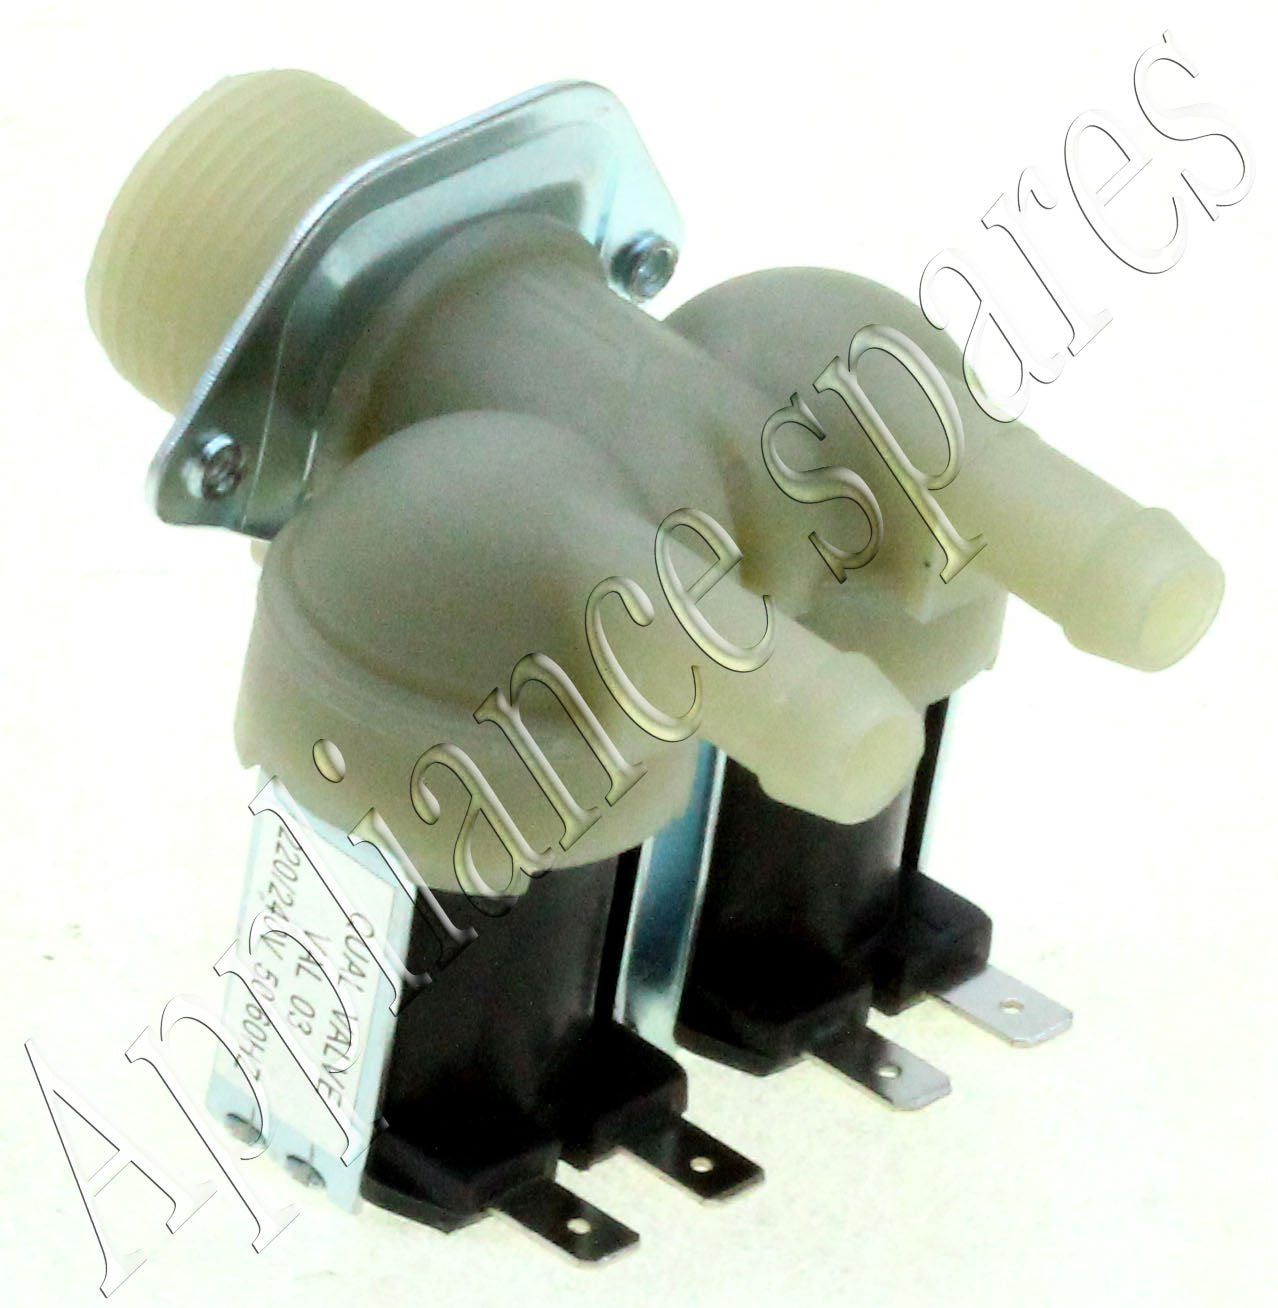 LG Washing Machine Straight Double Solenoid Valve (220v 10.5mm Outlet)